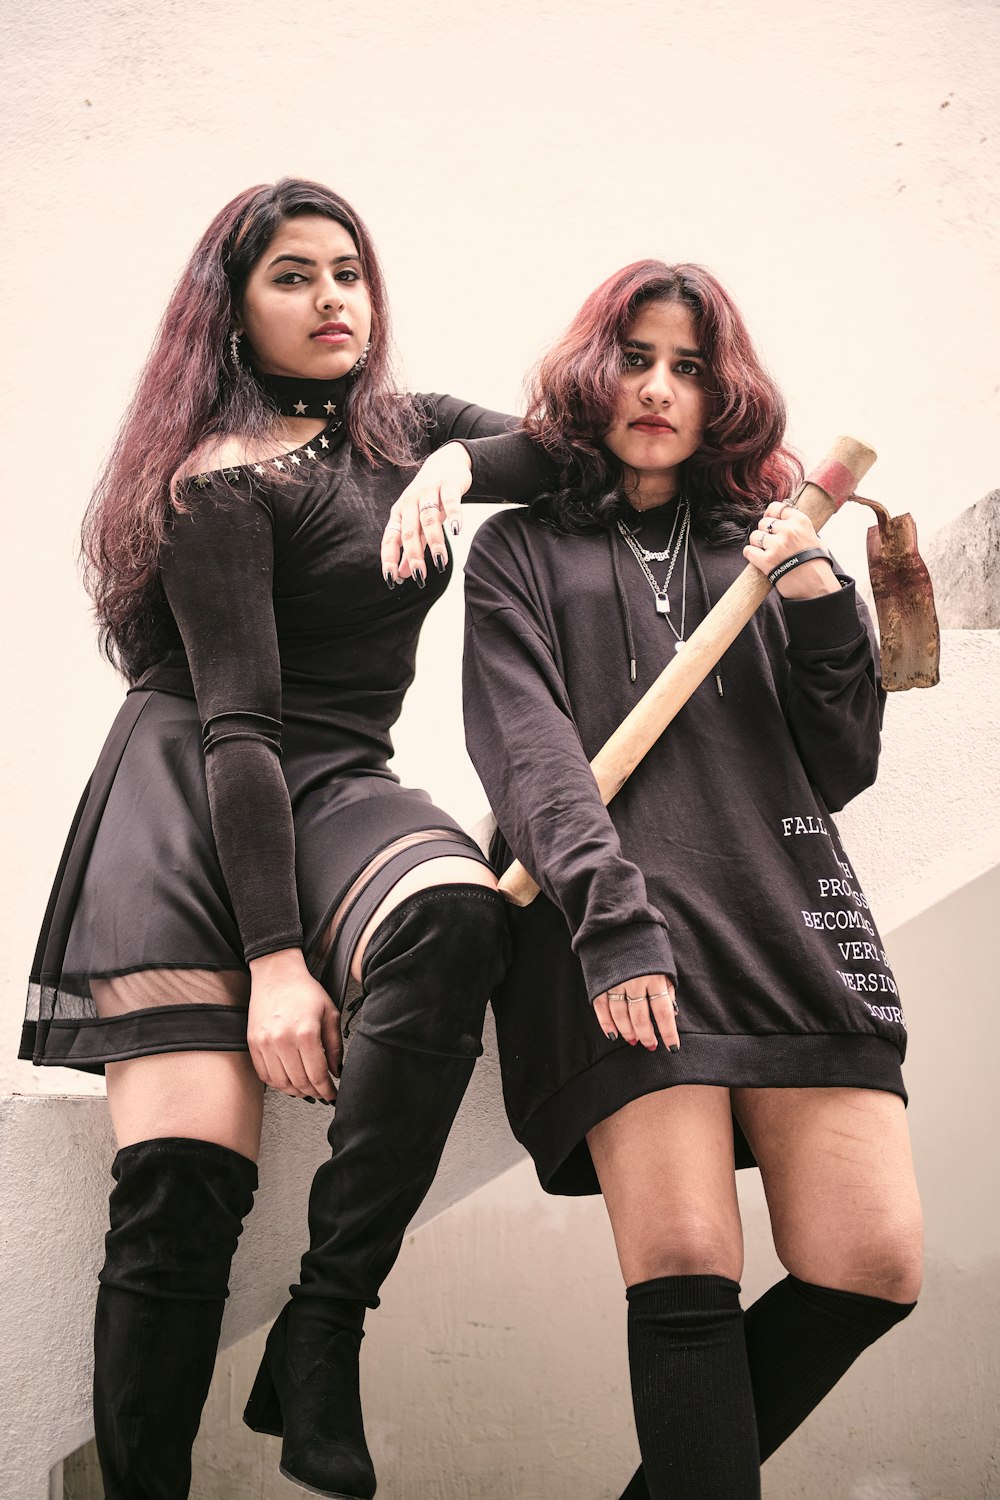 two women dressed in black posing for a picture